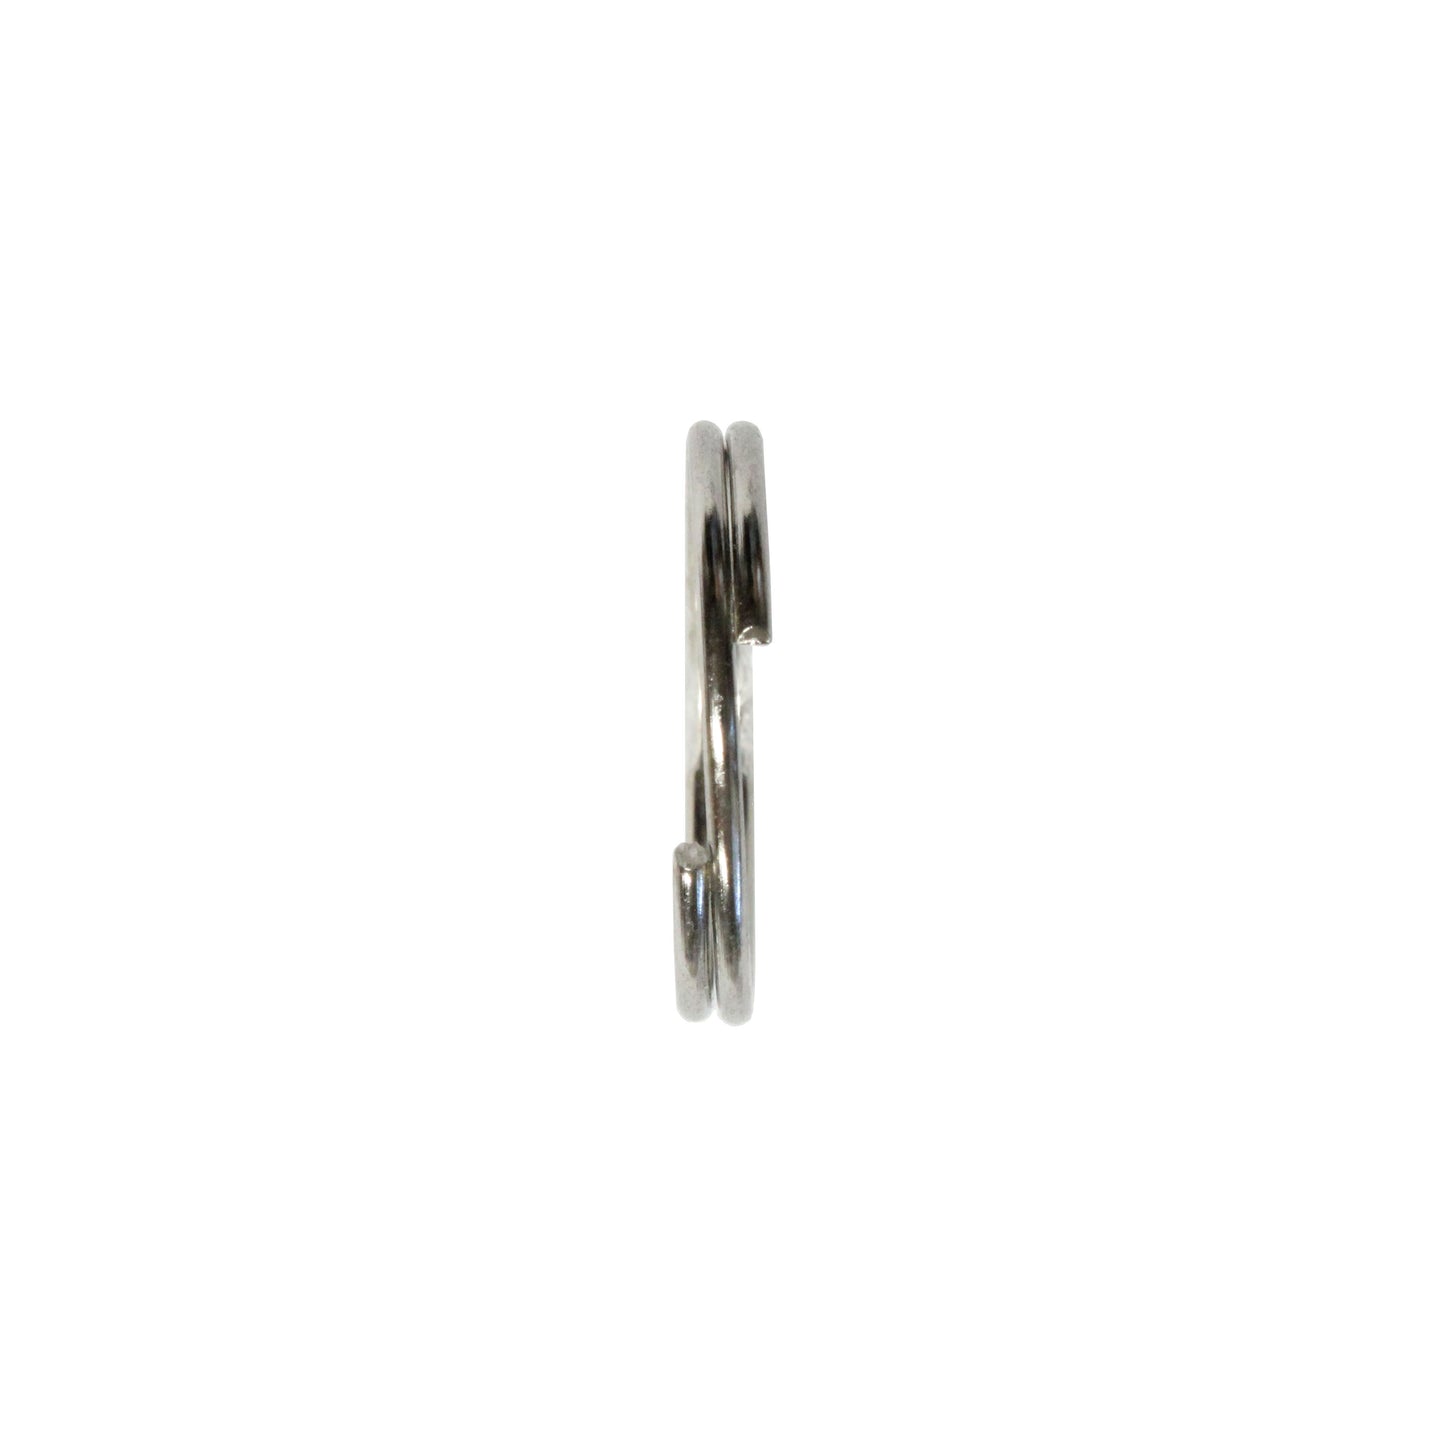 20mm Bright Rhodium Split Ring / 10 Pack / for key rings or secure charms or tags